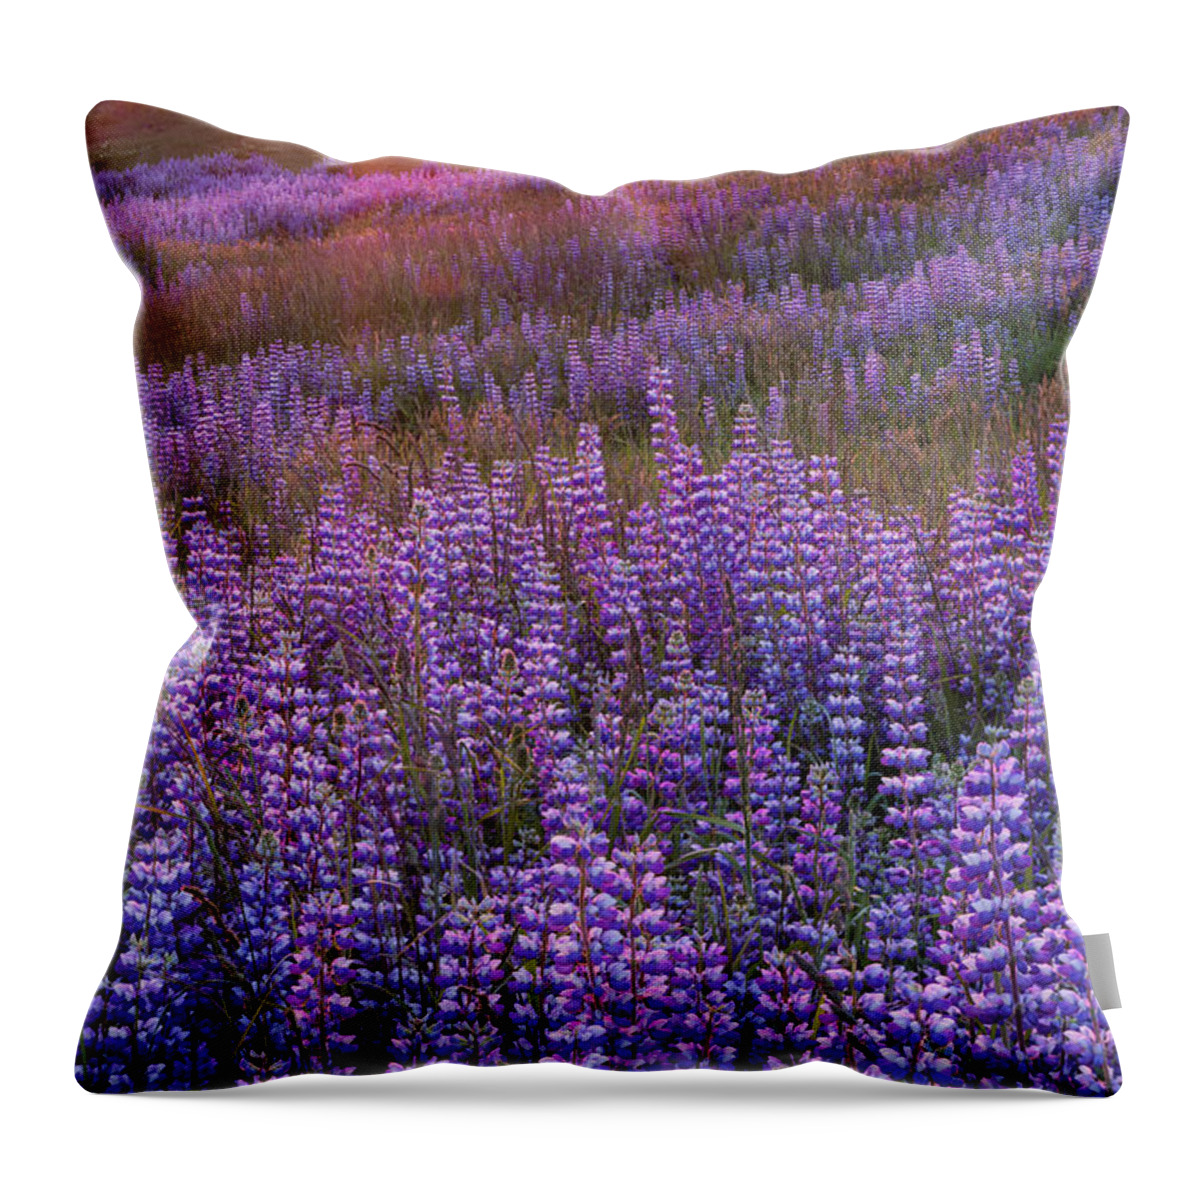 Jeff Foott Throw Pillow featuring the photograph Sunset Lupine In Redwood Natl Park by Jeff Foott